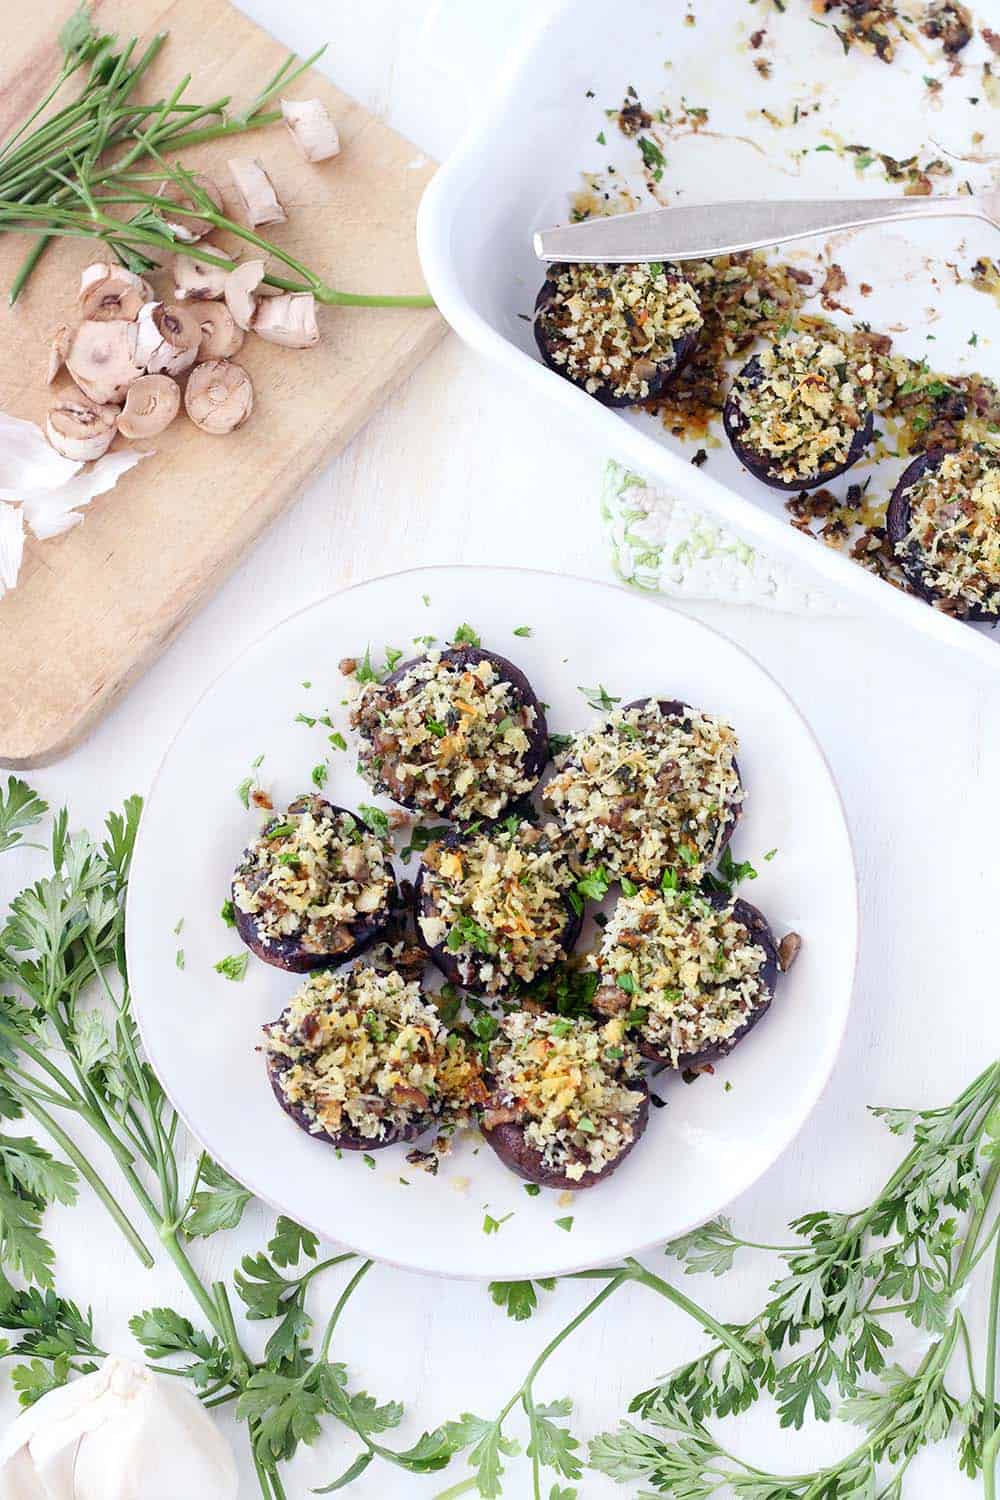 These Italian Vegetarian Stuffed Mushrooms are a great make-ahead recipe for dinner or an appetizer! They're packed with flavor from the fresh herbs, shallots, garlic, and parmesan cheese. 